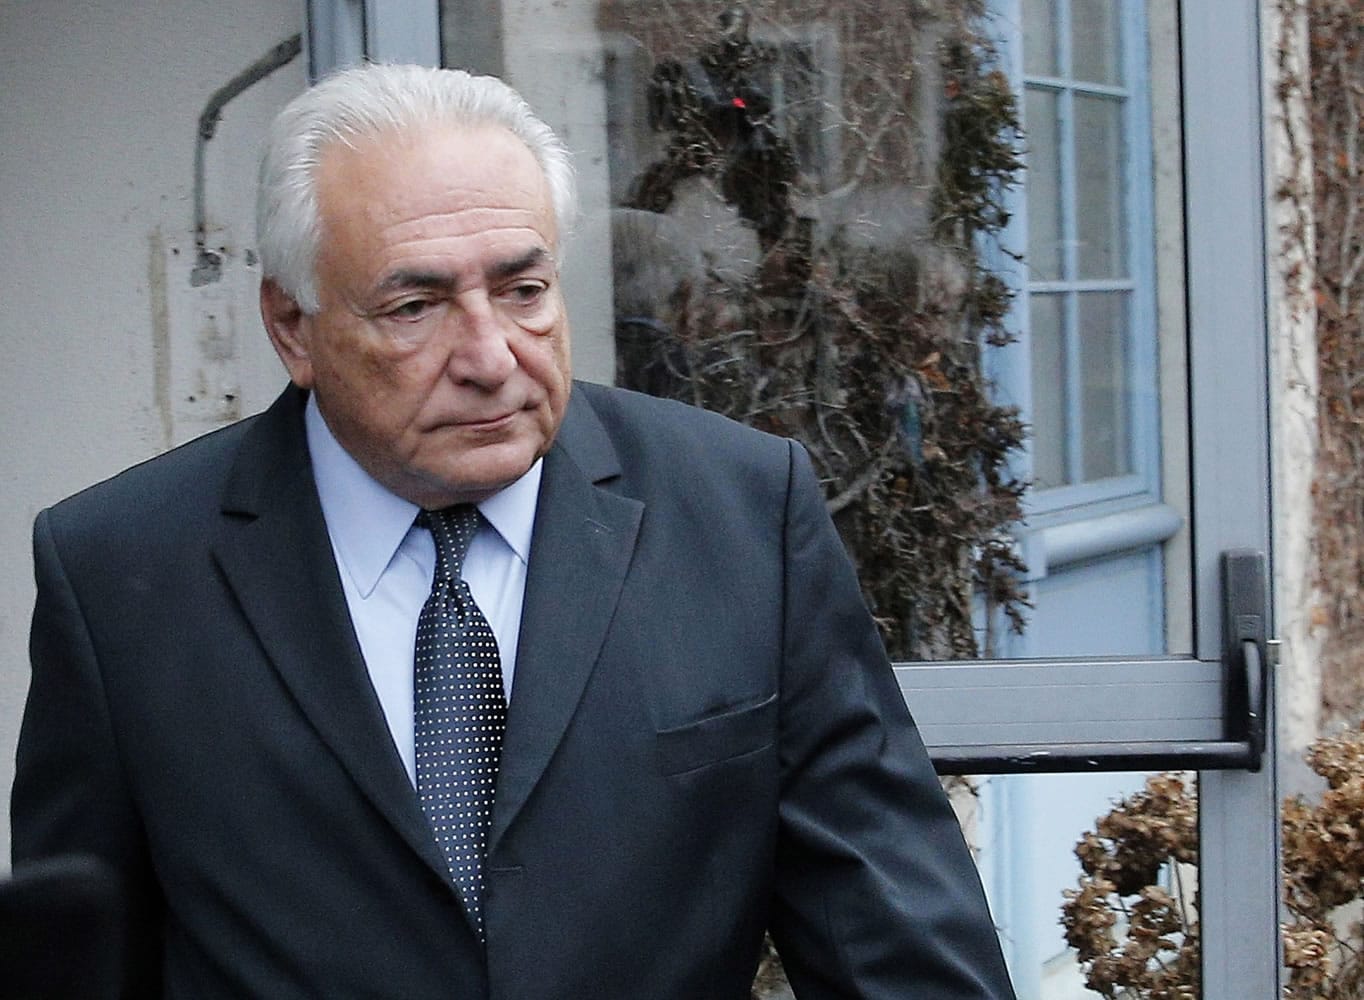 Courts say there are no grounds for conviction of Dominique Strauss-Kahn.